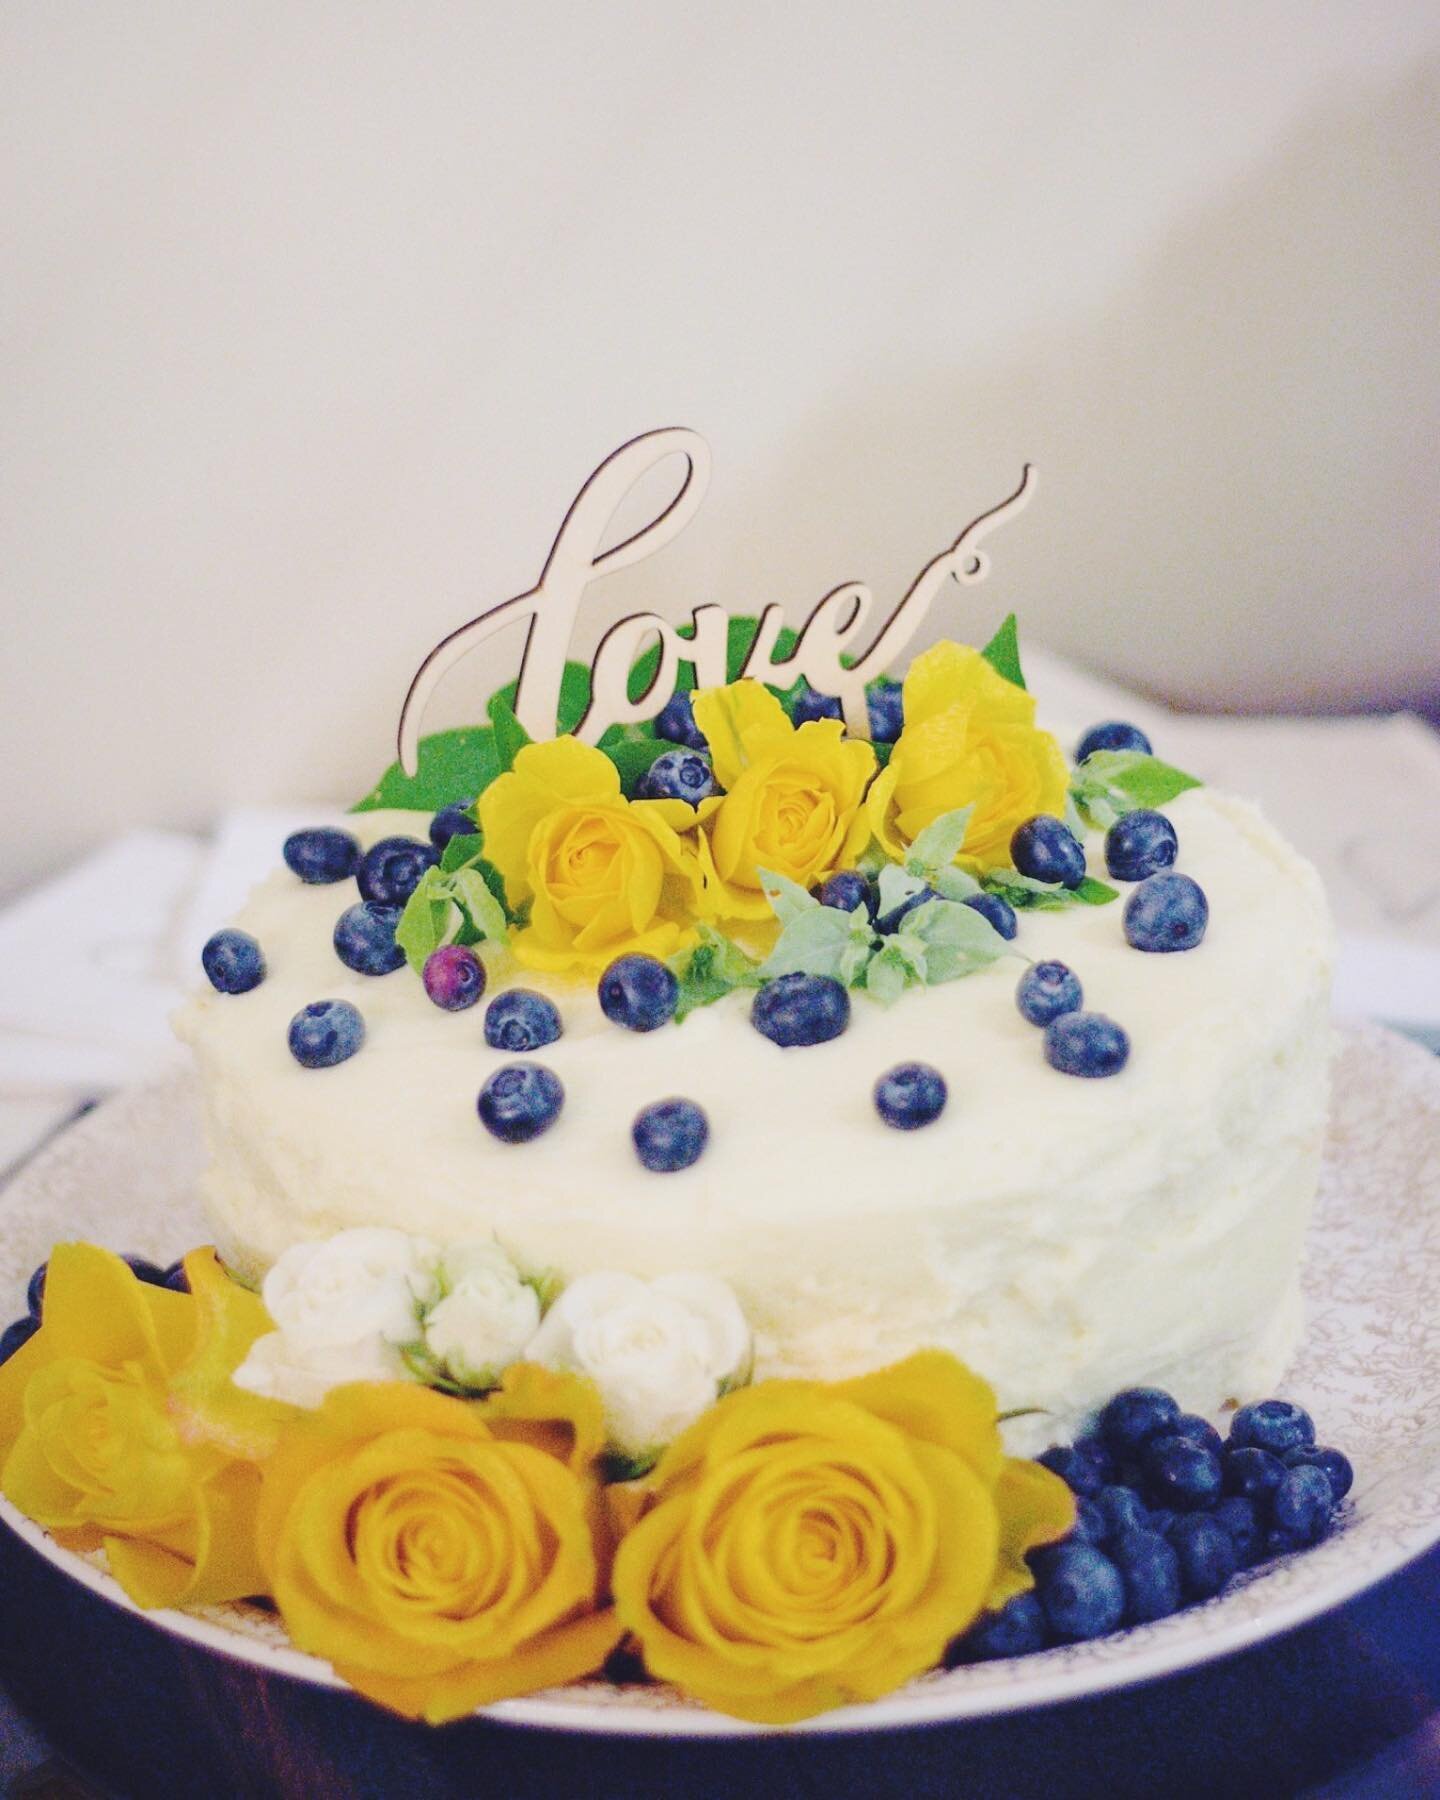 Simply perfect!
.
.
.
We love the simplicity of this cake&mdash; and the contrast of the yellow roses with the blueberries! 💛
&amp;&amp; the cupcakes complimented this design so well&mdash; and did I say YUM!
.
.
.
If you&rsquo;re looking for some I